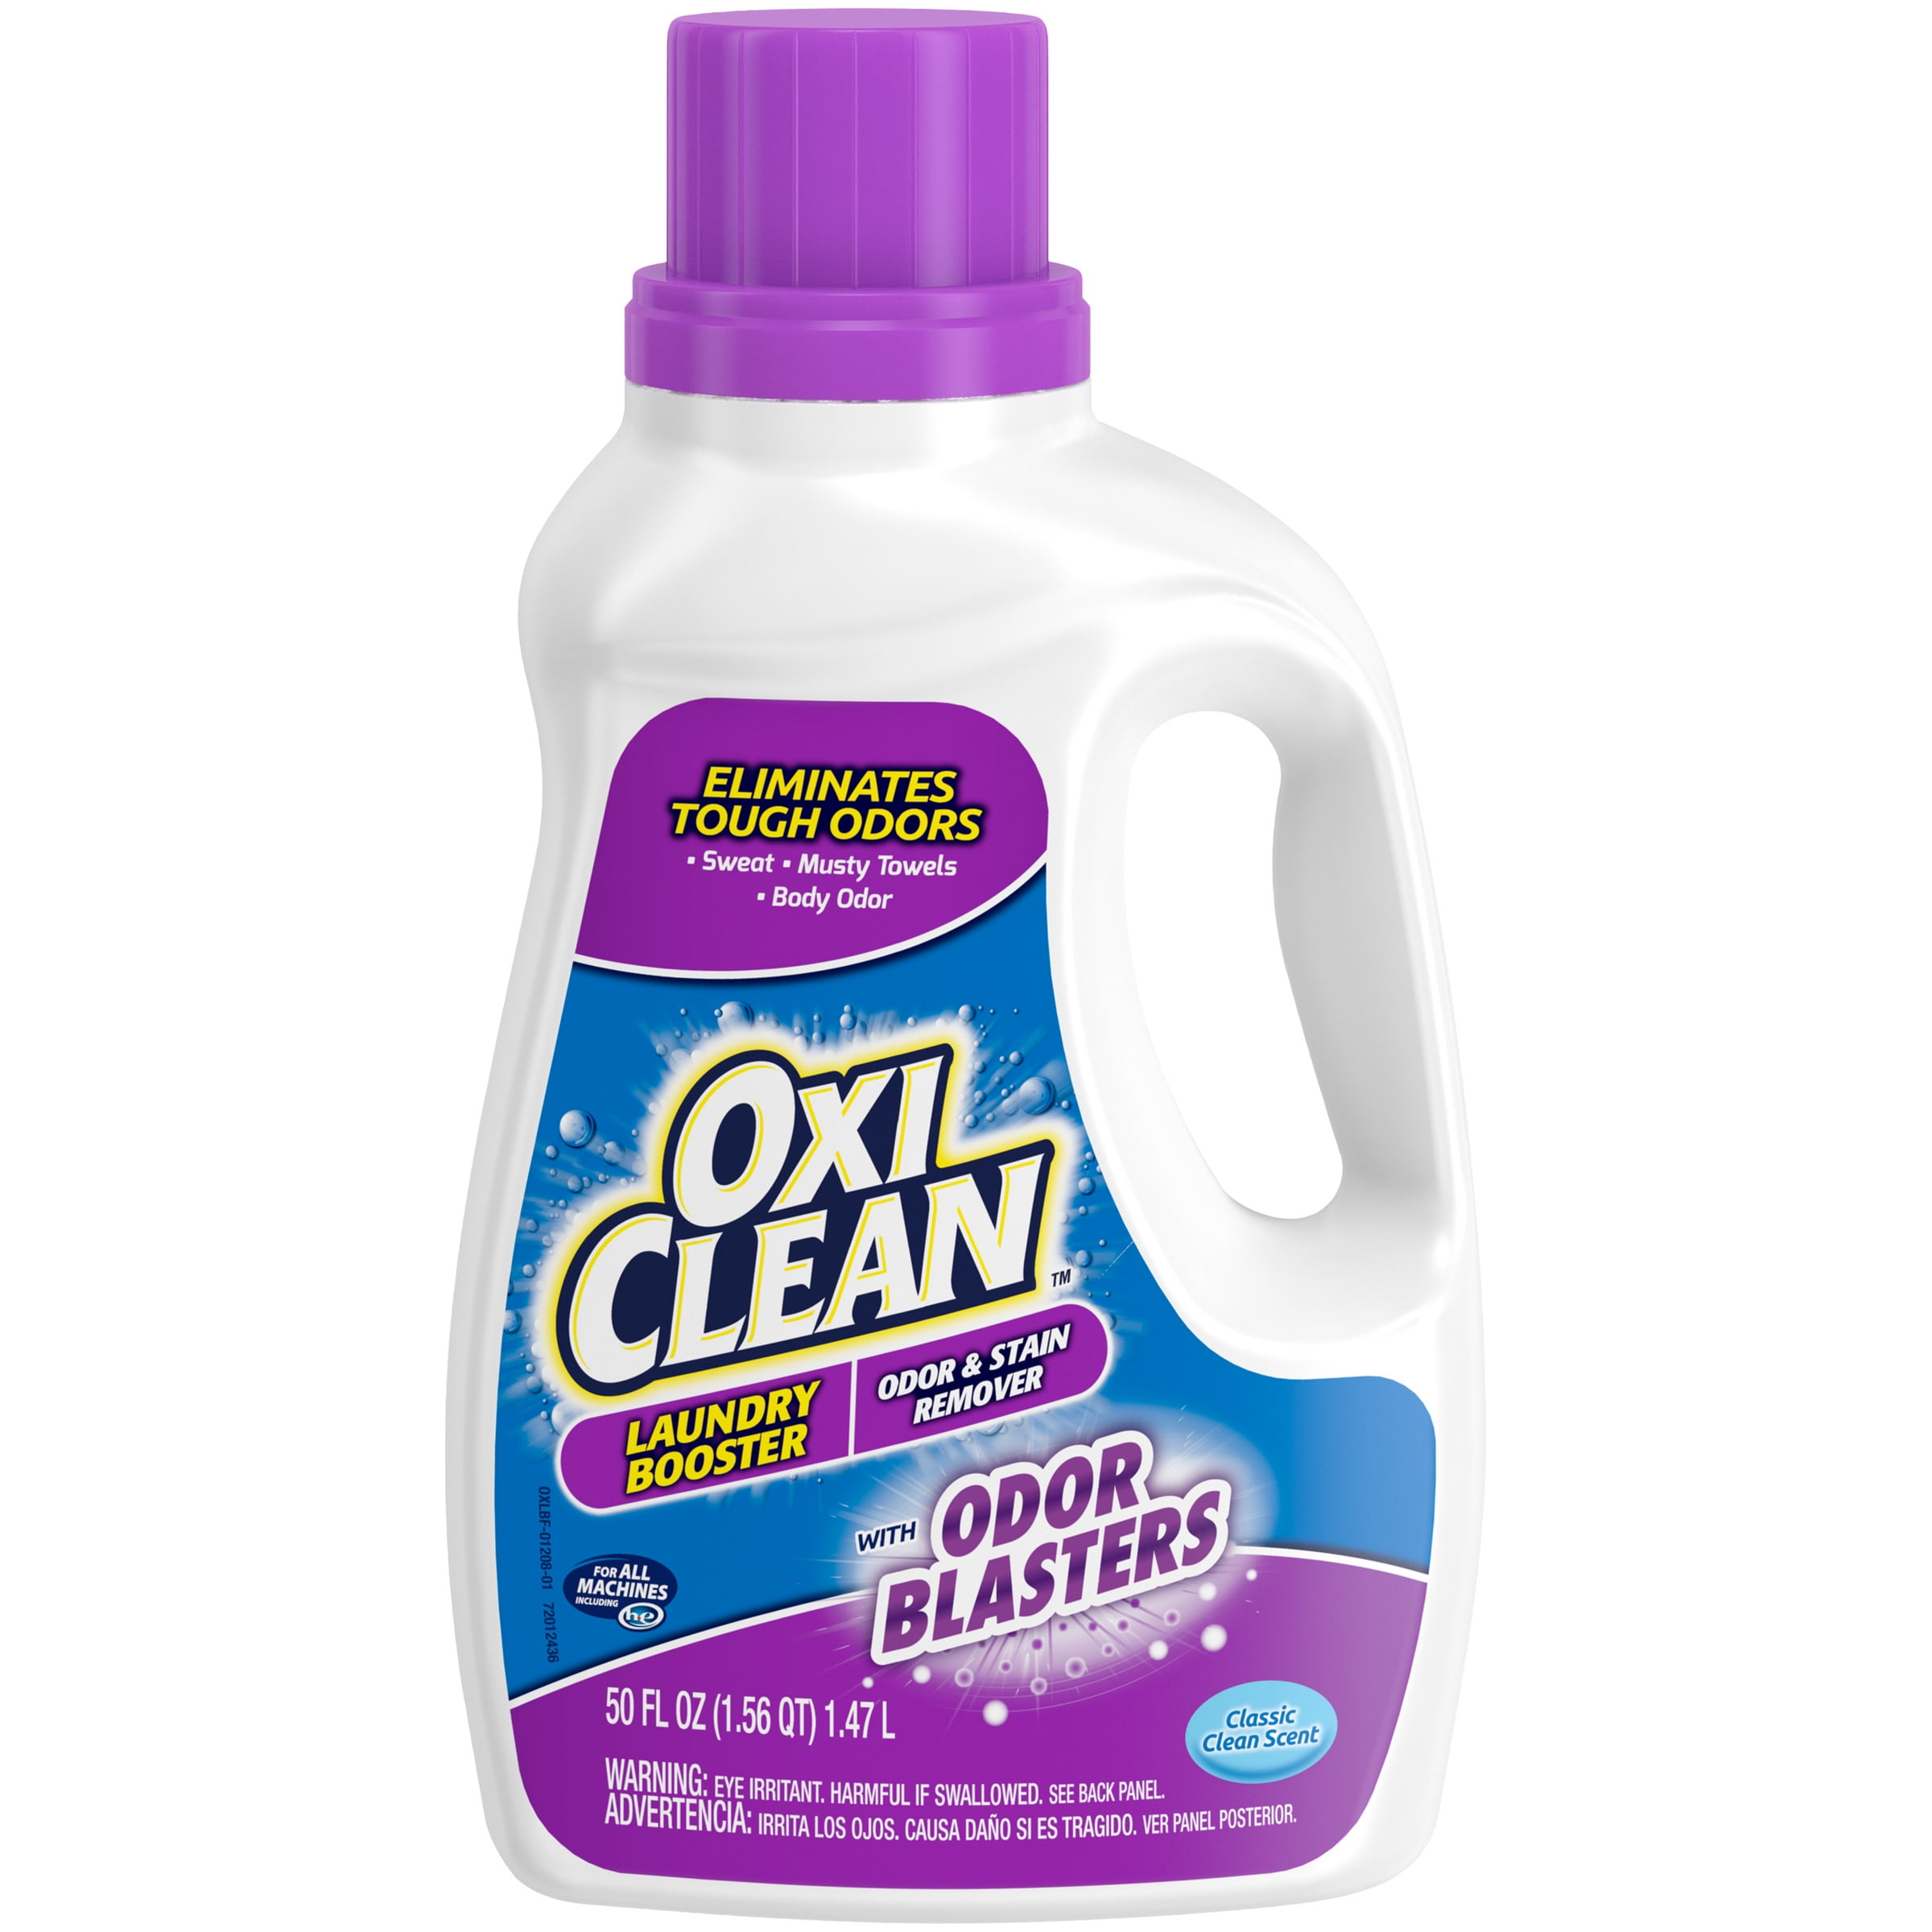 oxiclean-odor-blasters-odor-and-stain-remover-laundry-booster-50-ounce